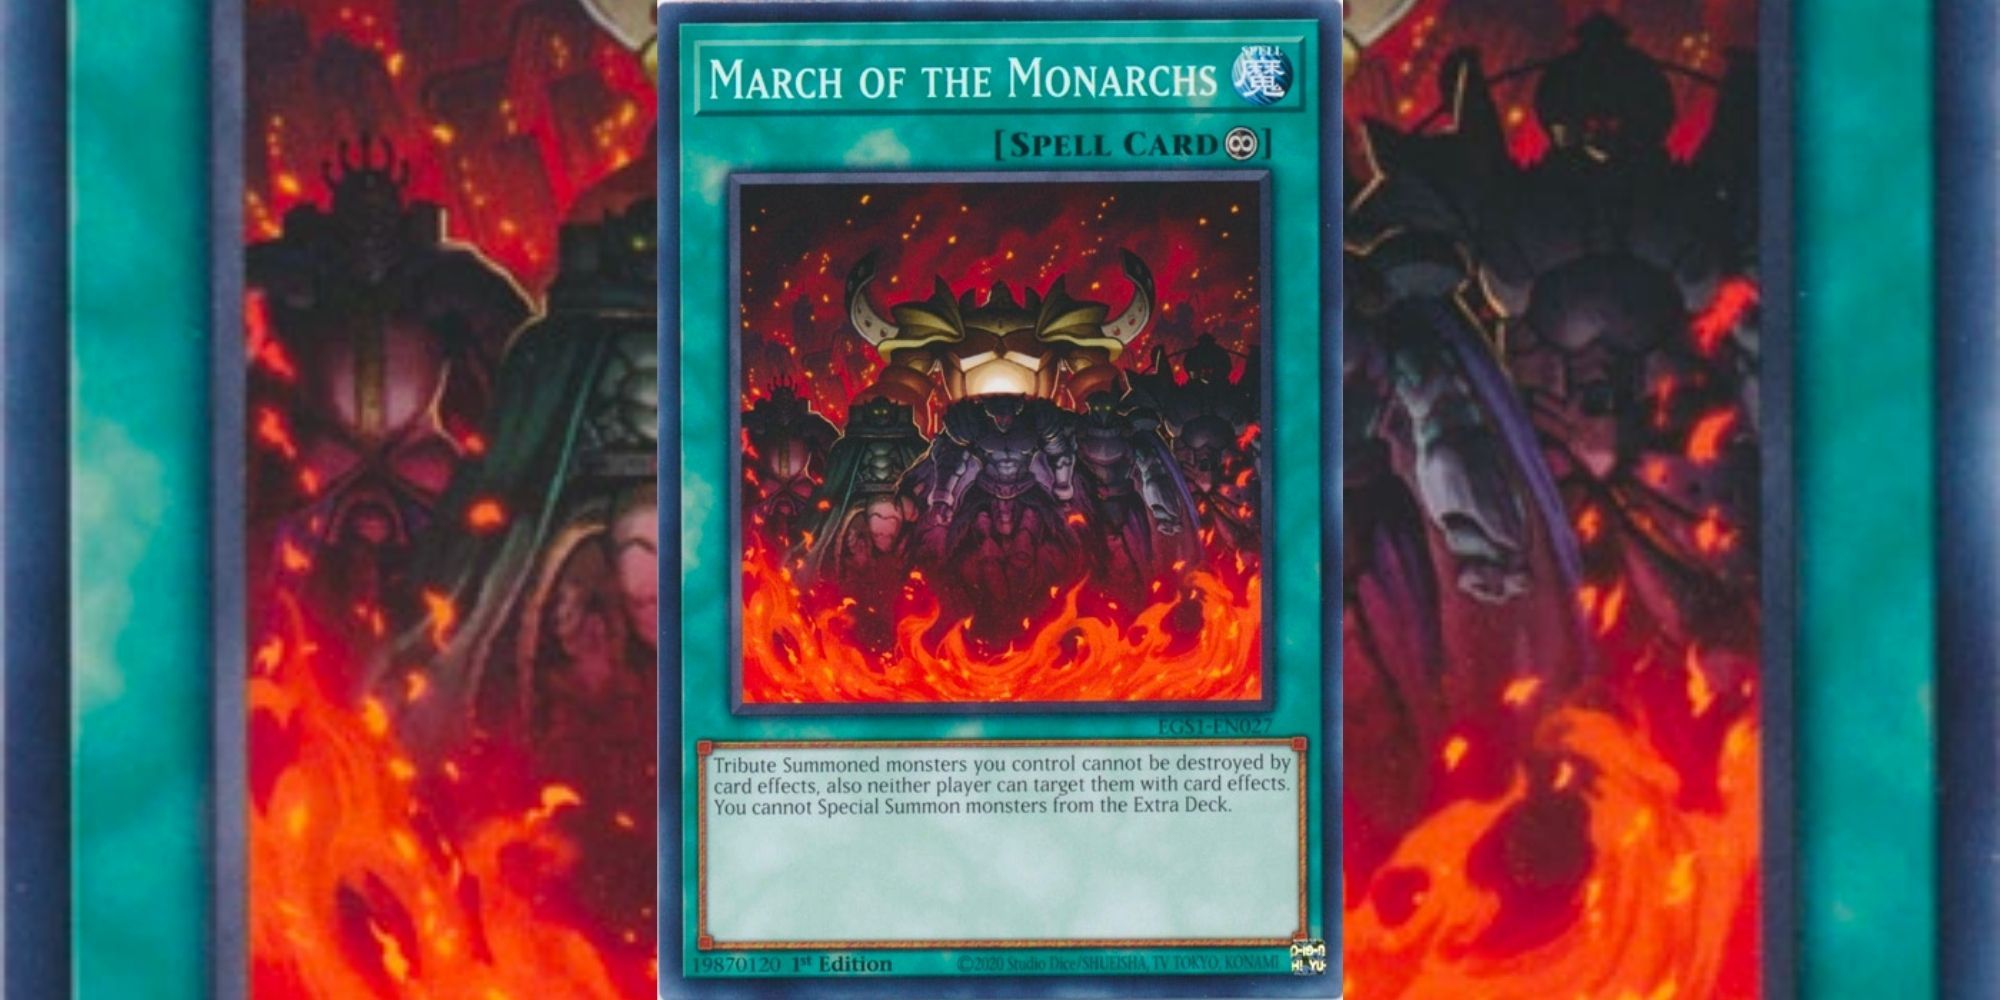 March of the Monarchs card in Yu-Gi-Oh!